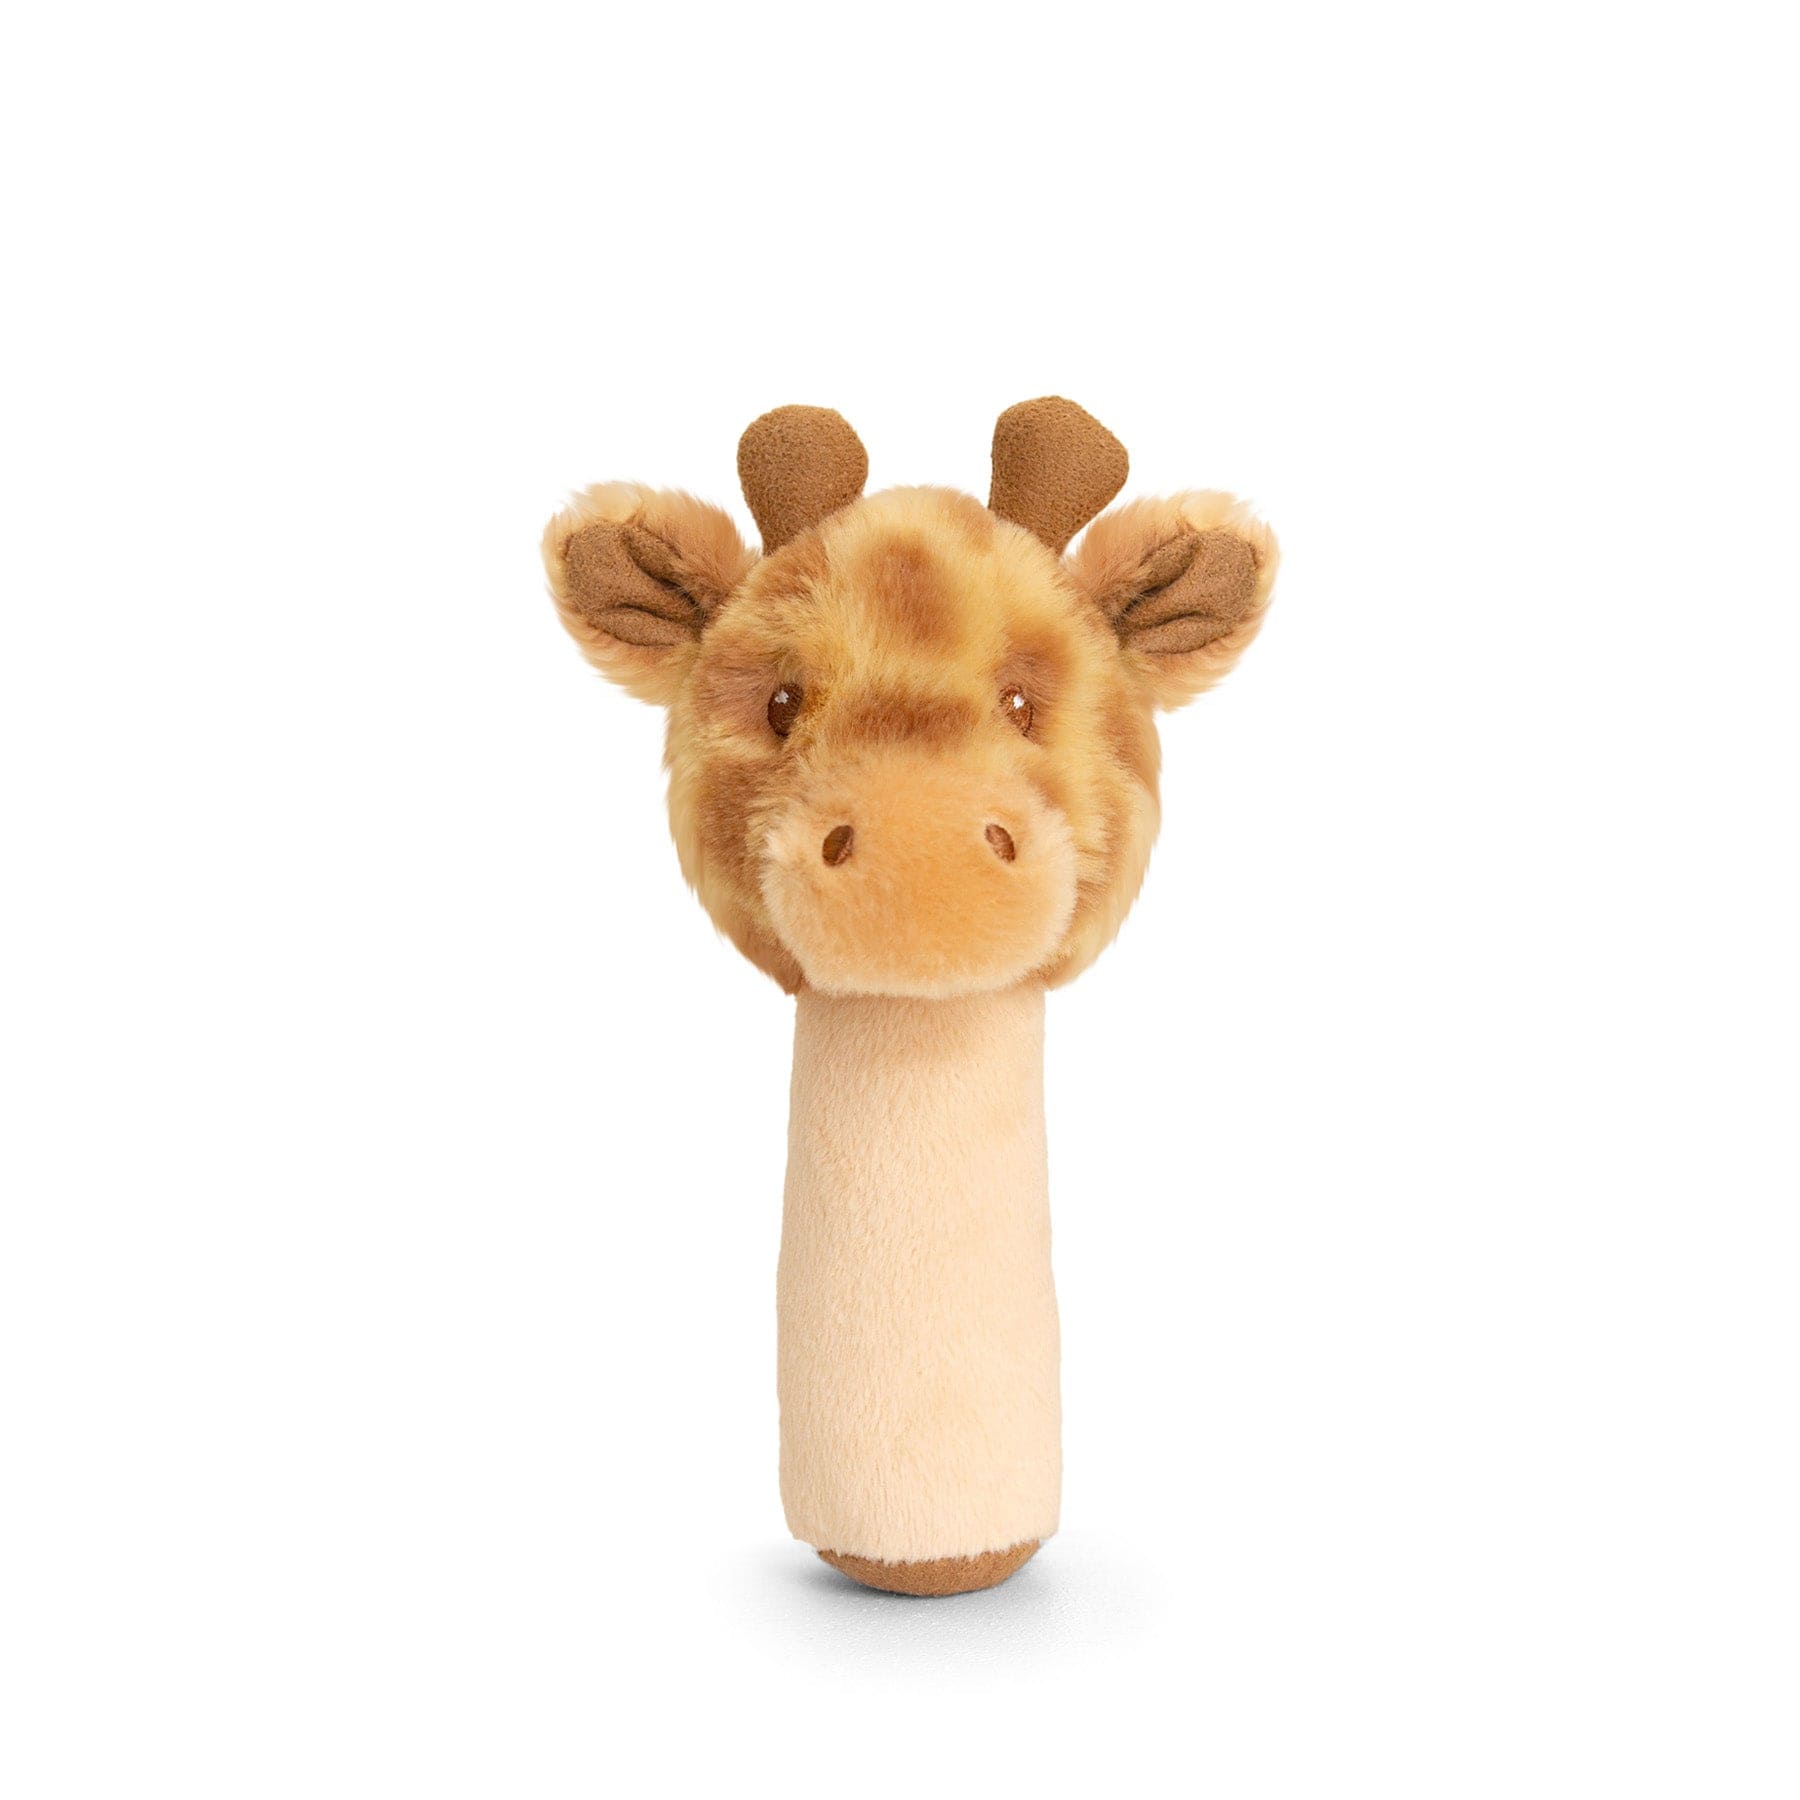 Plush giraffe toy isolated on white background, cute stuffed animal, children's toy giraffe, soft plaything with friendly face.